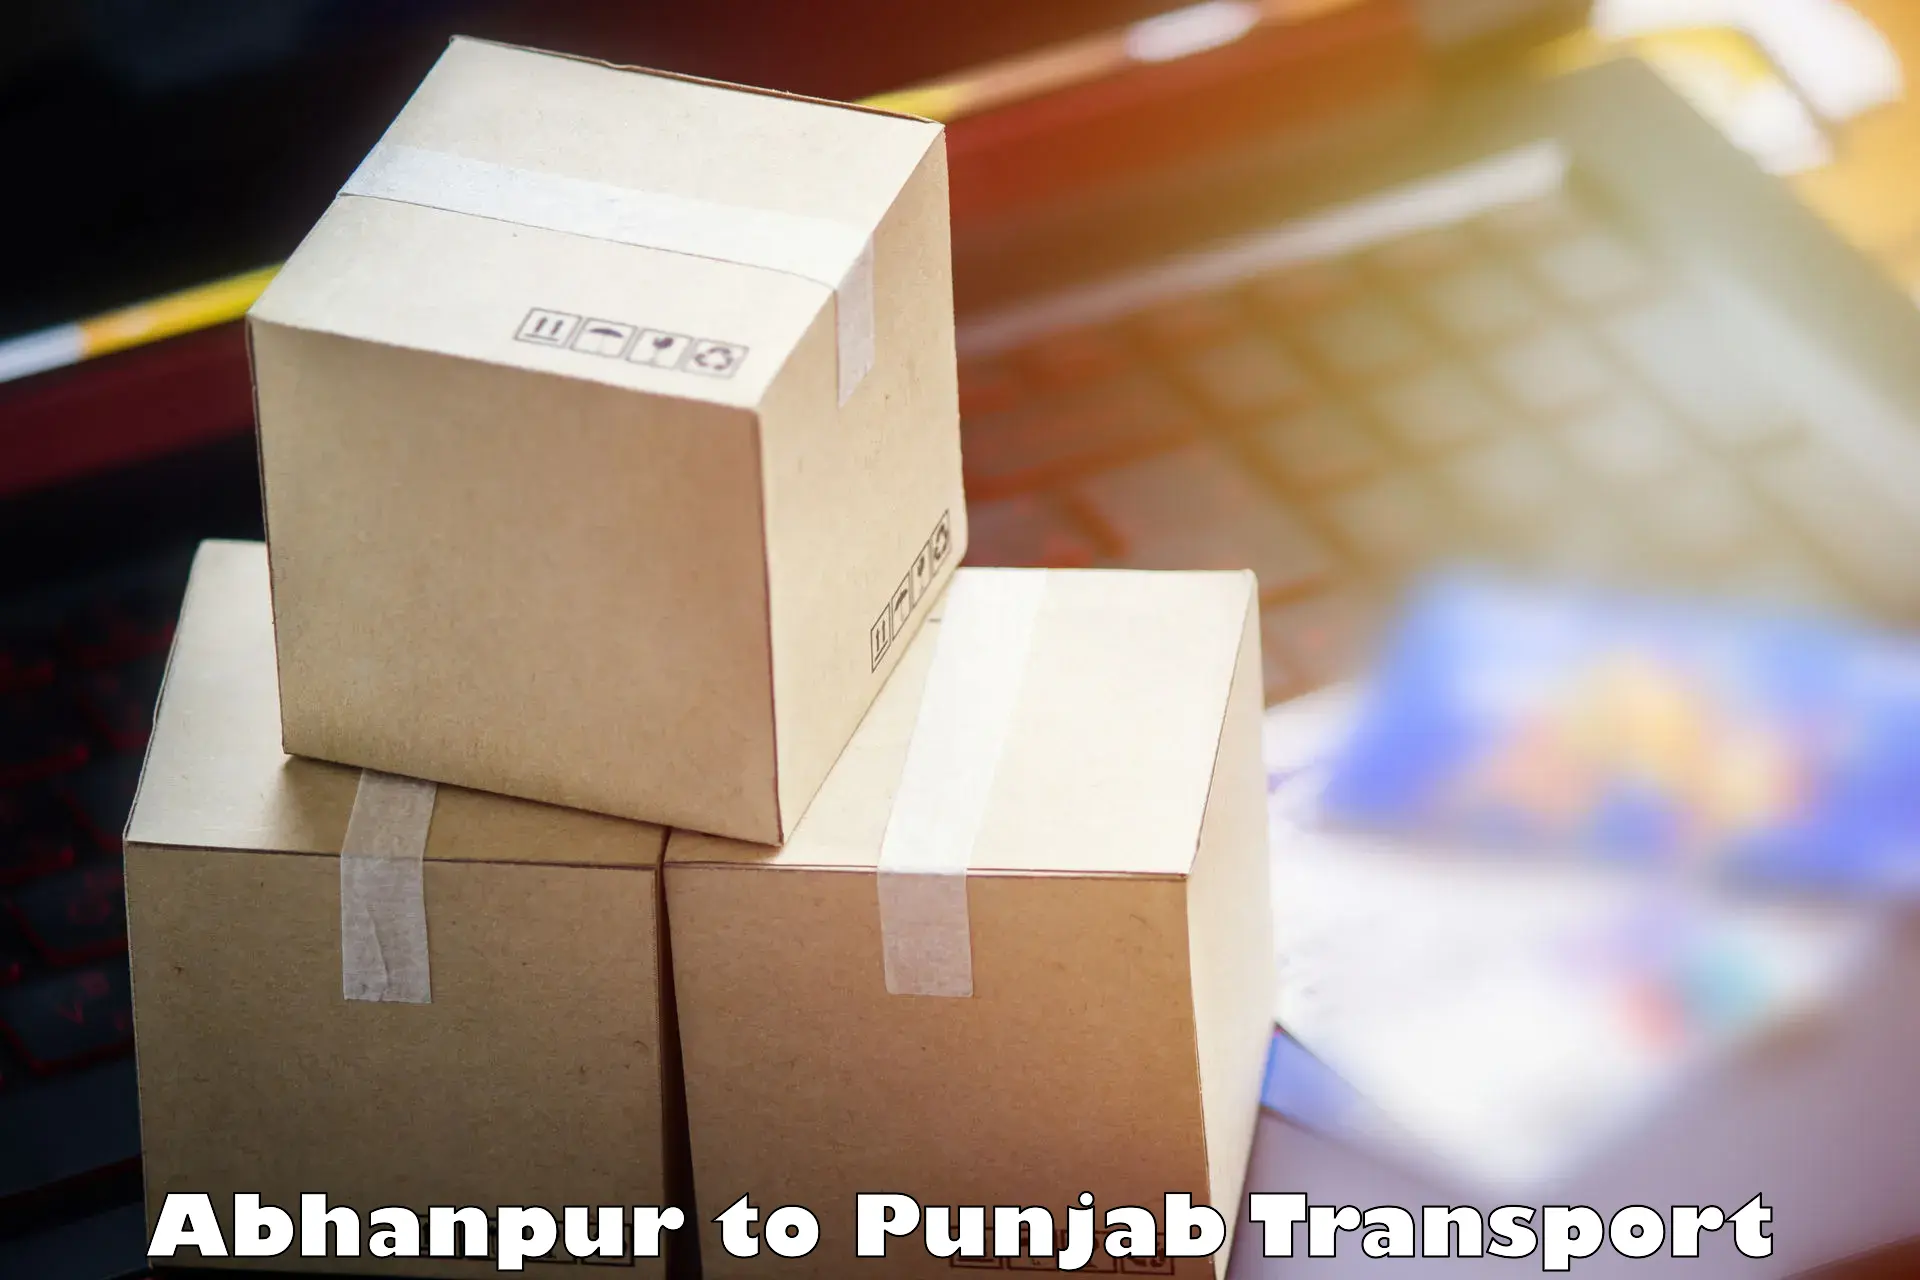 Road transport online services Abhanpur to Amritsar